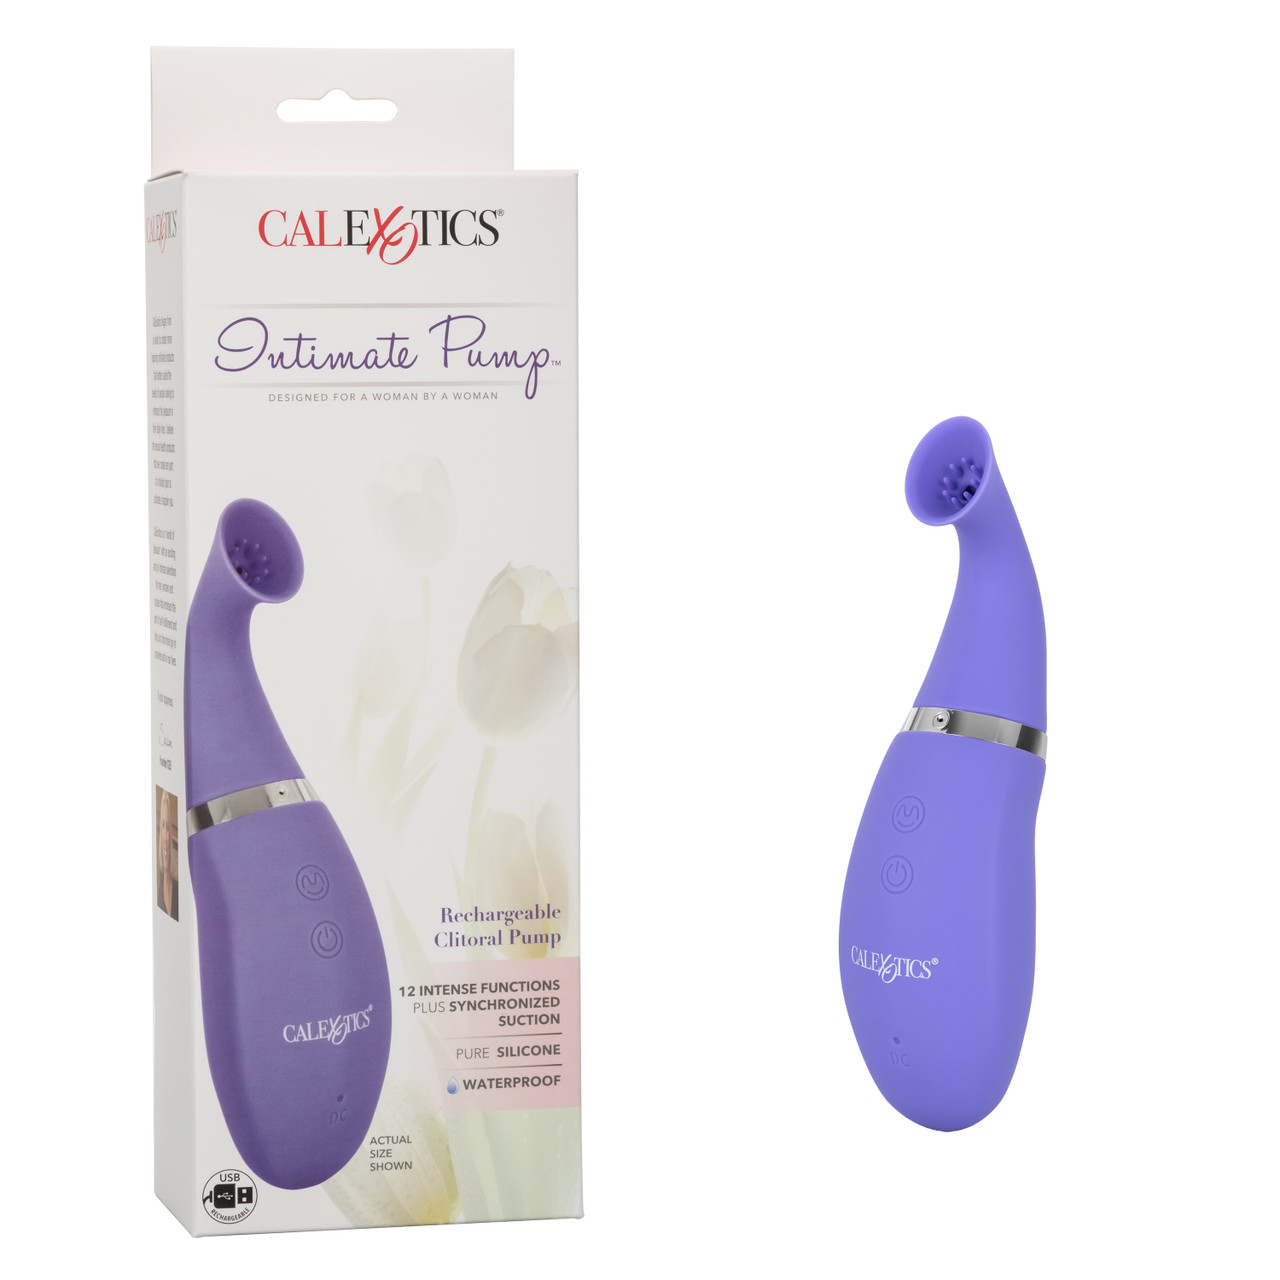 Intimate Pump™ Rechargeable Clitoral Pump pic